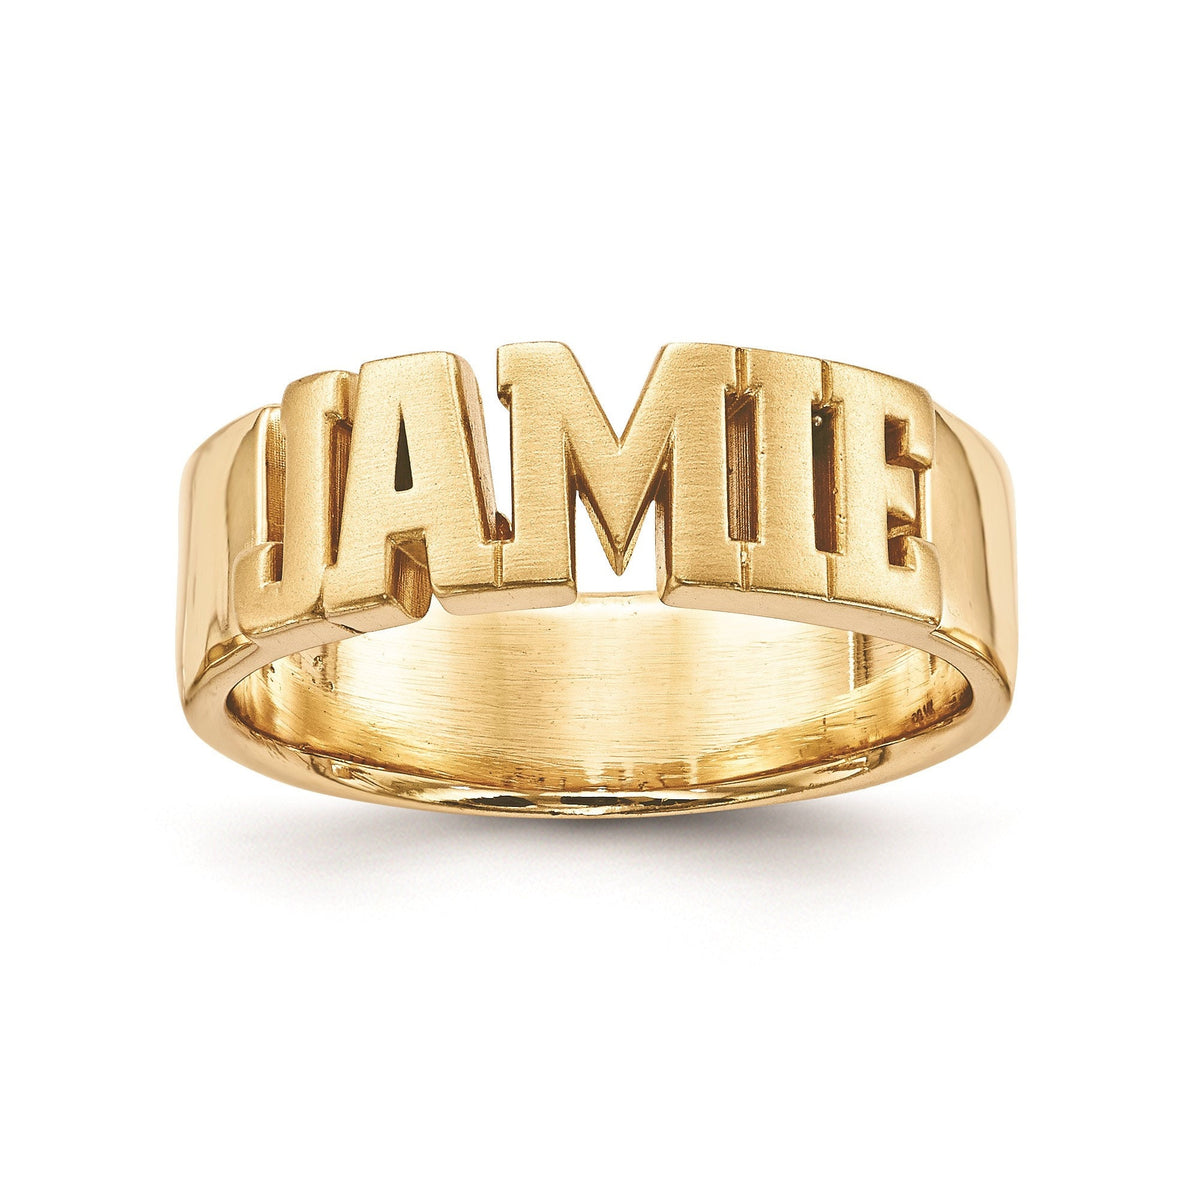 Personalized Name Ring 10k Yellow Gold, 10k White Gold, Sterling Silver Gift Box Included Ring Sizes 5-12 Metal Weight 12.2 Grams